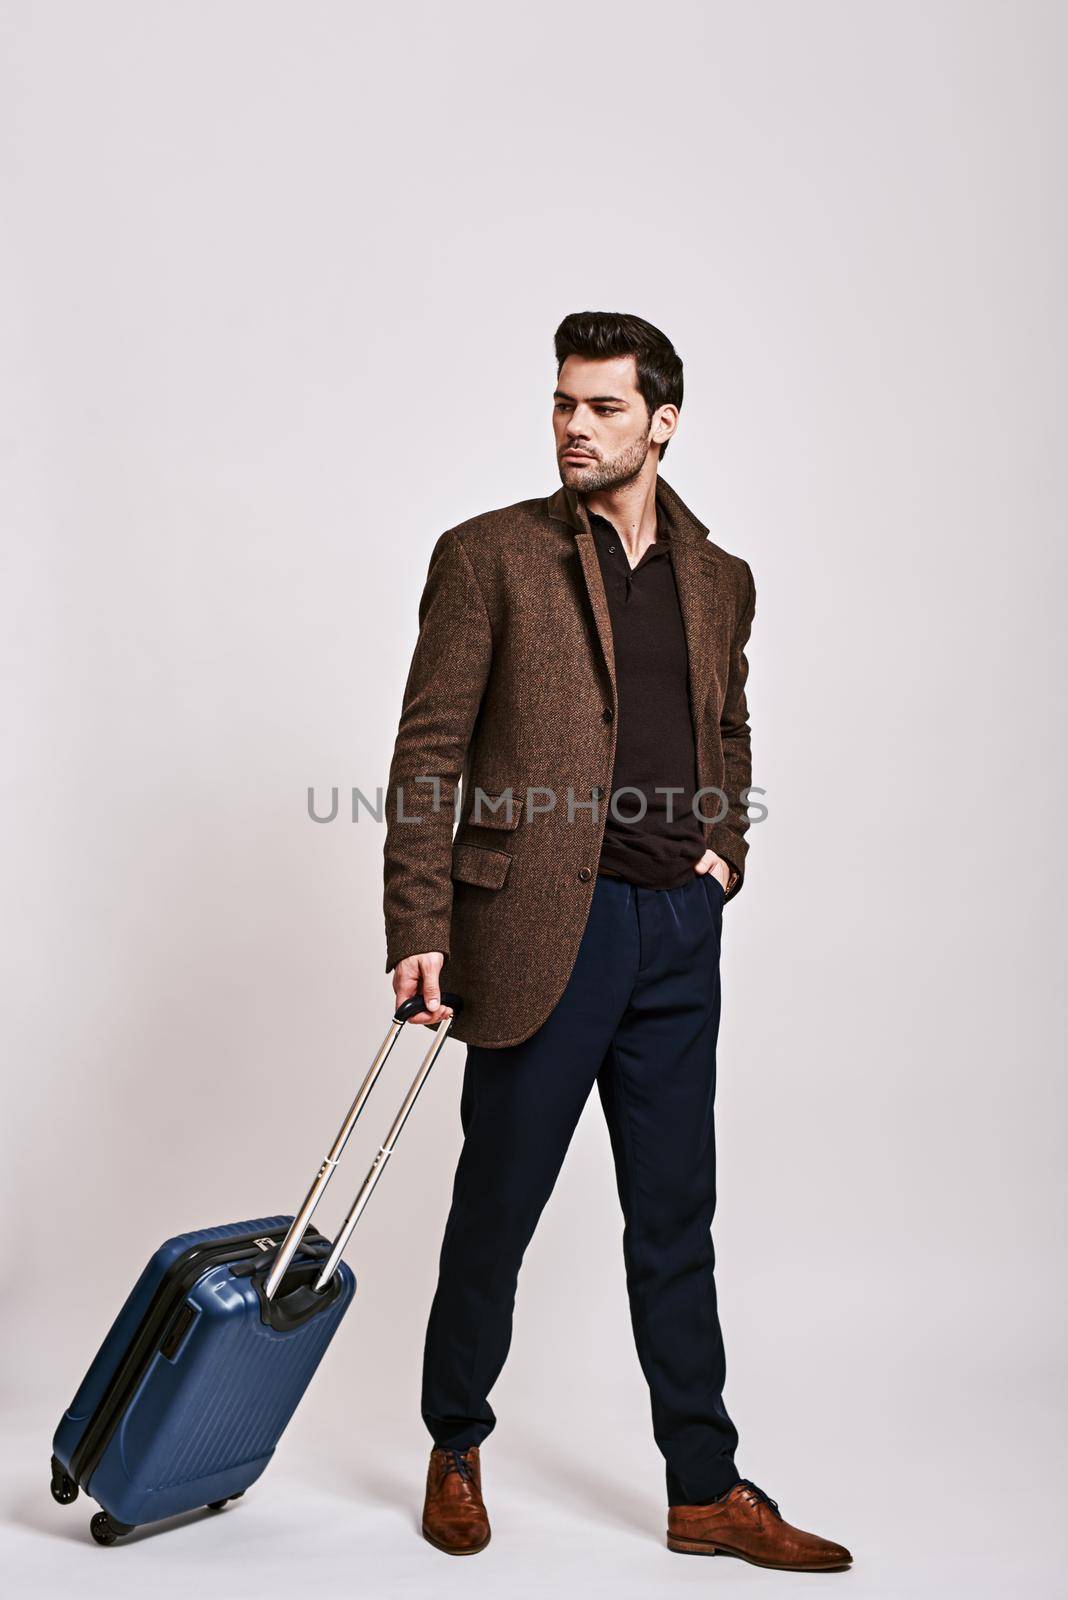 Ready to travel. Stylish dark-haired man standing with suitcase and looking away isolated over grey background by friendsstock